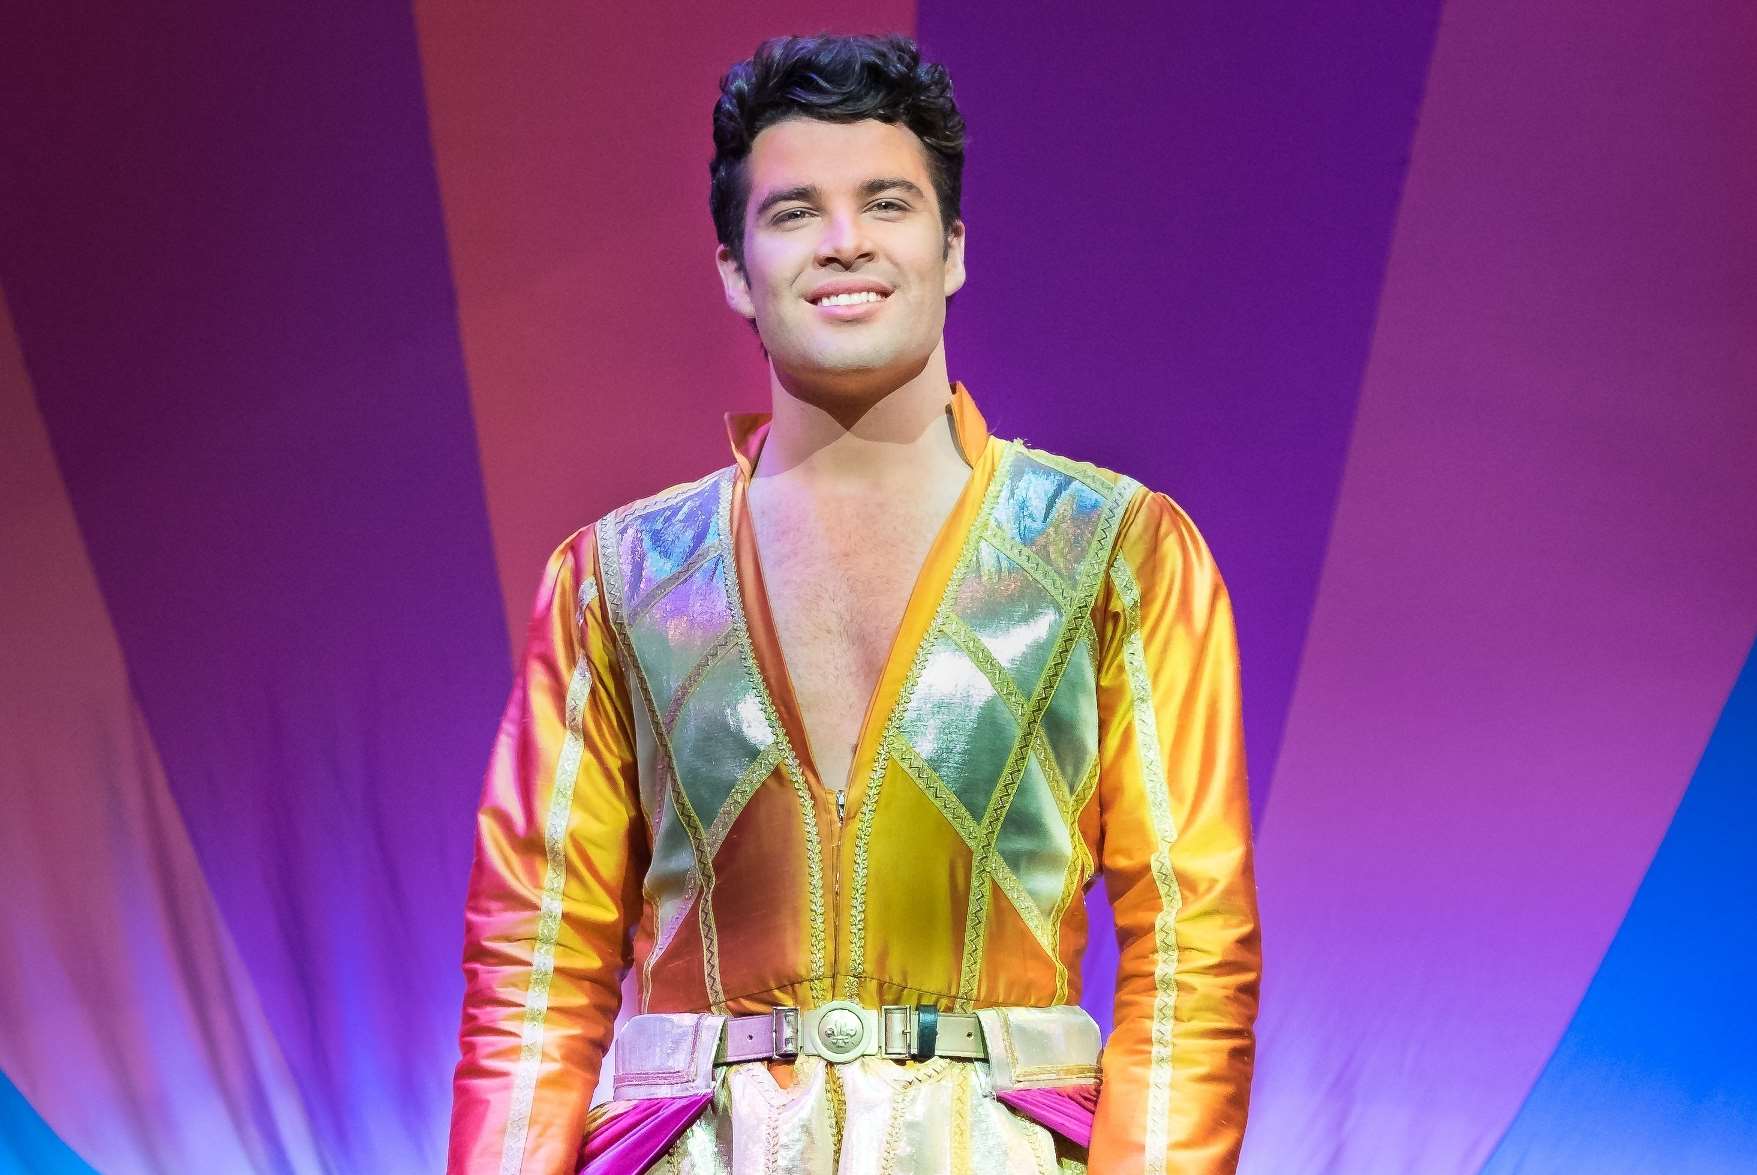 Joe McElderry dons the coat of many colours for Dartford's Orchard Theatre